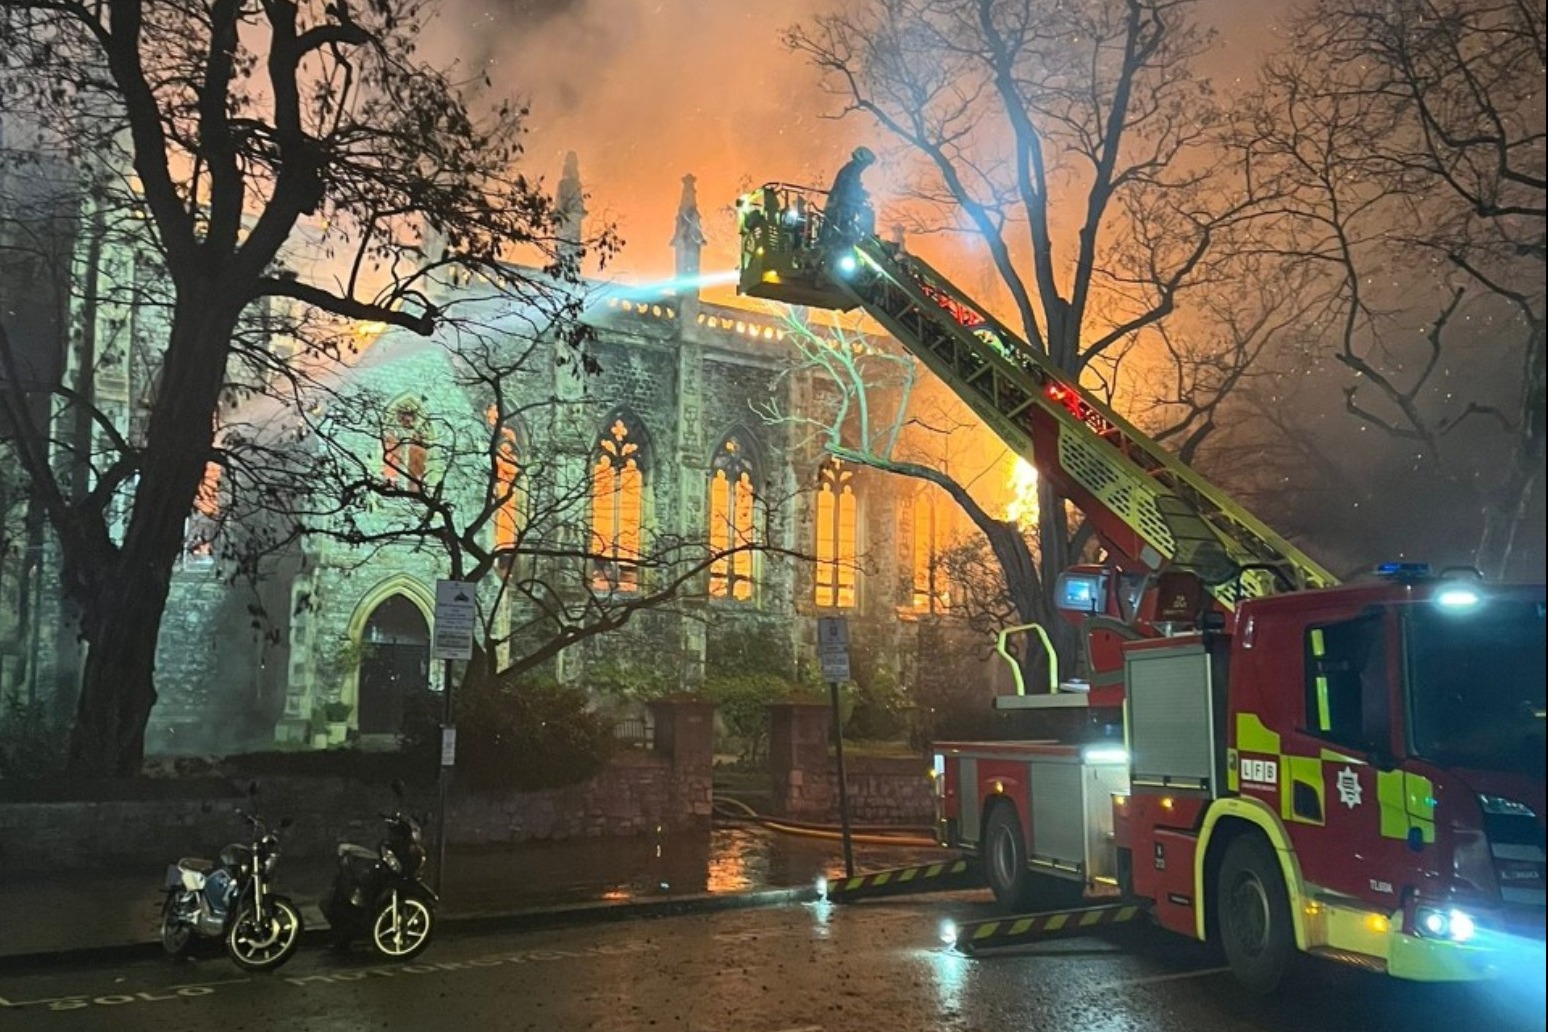 London church described as ‘historical treasure’ destroyed by fire 